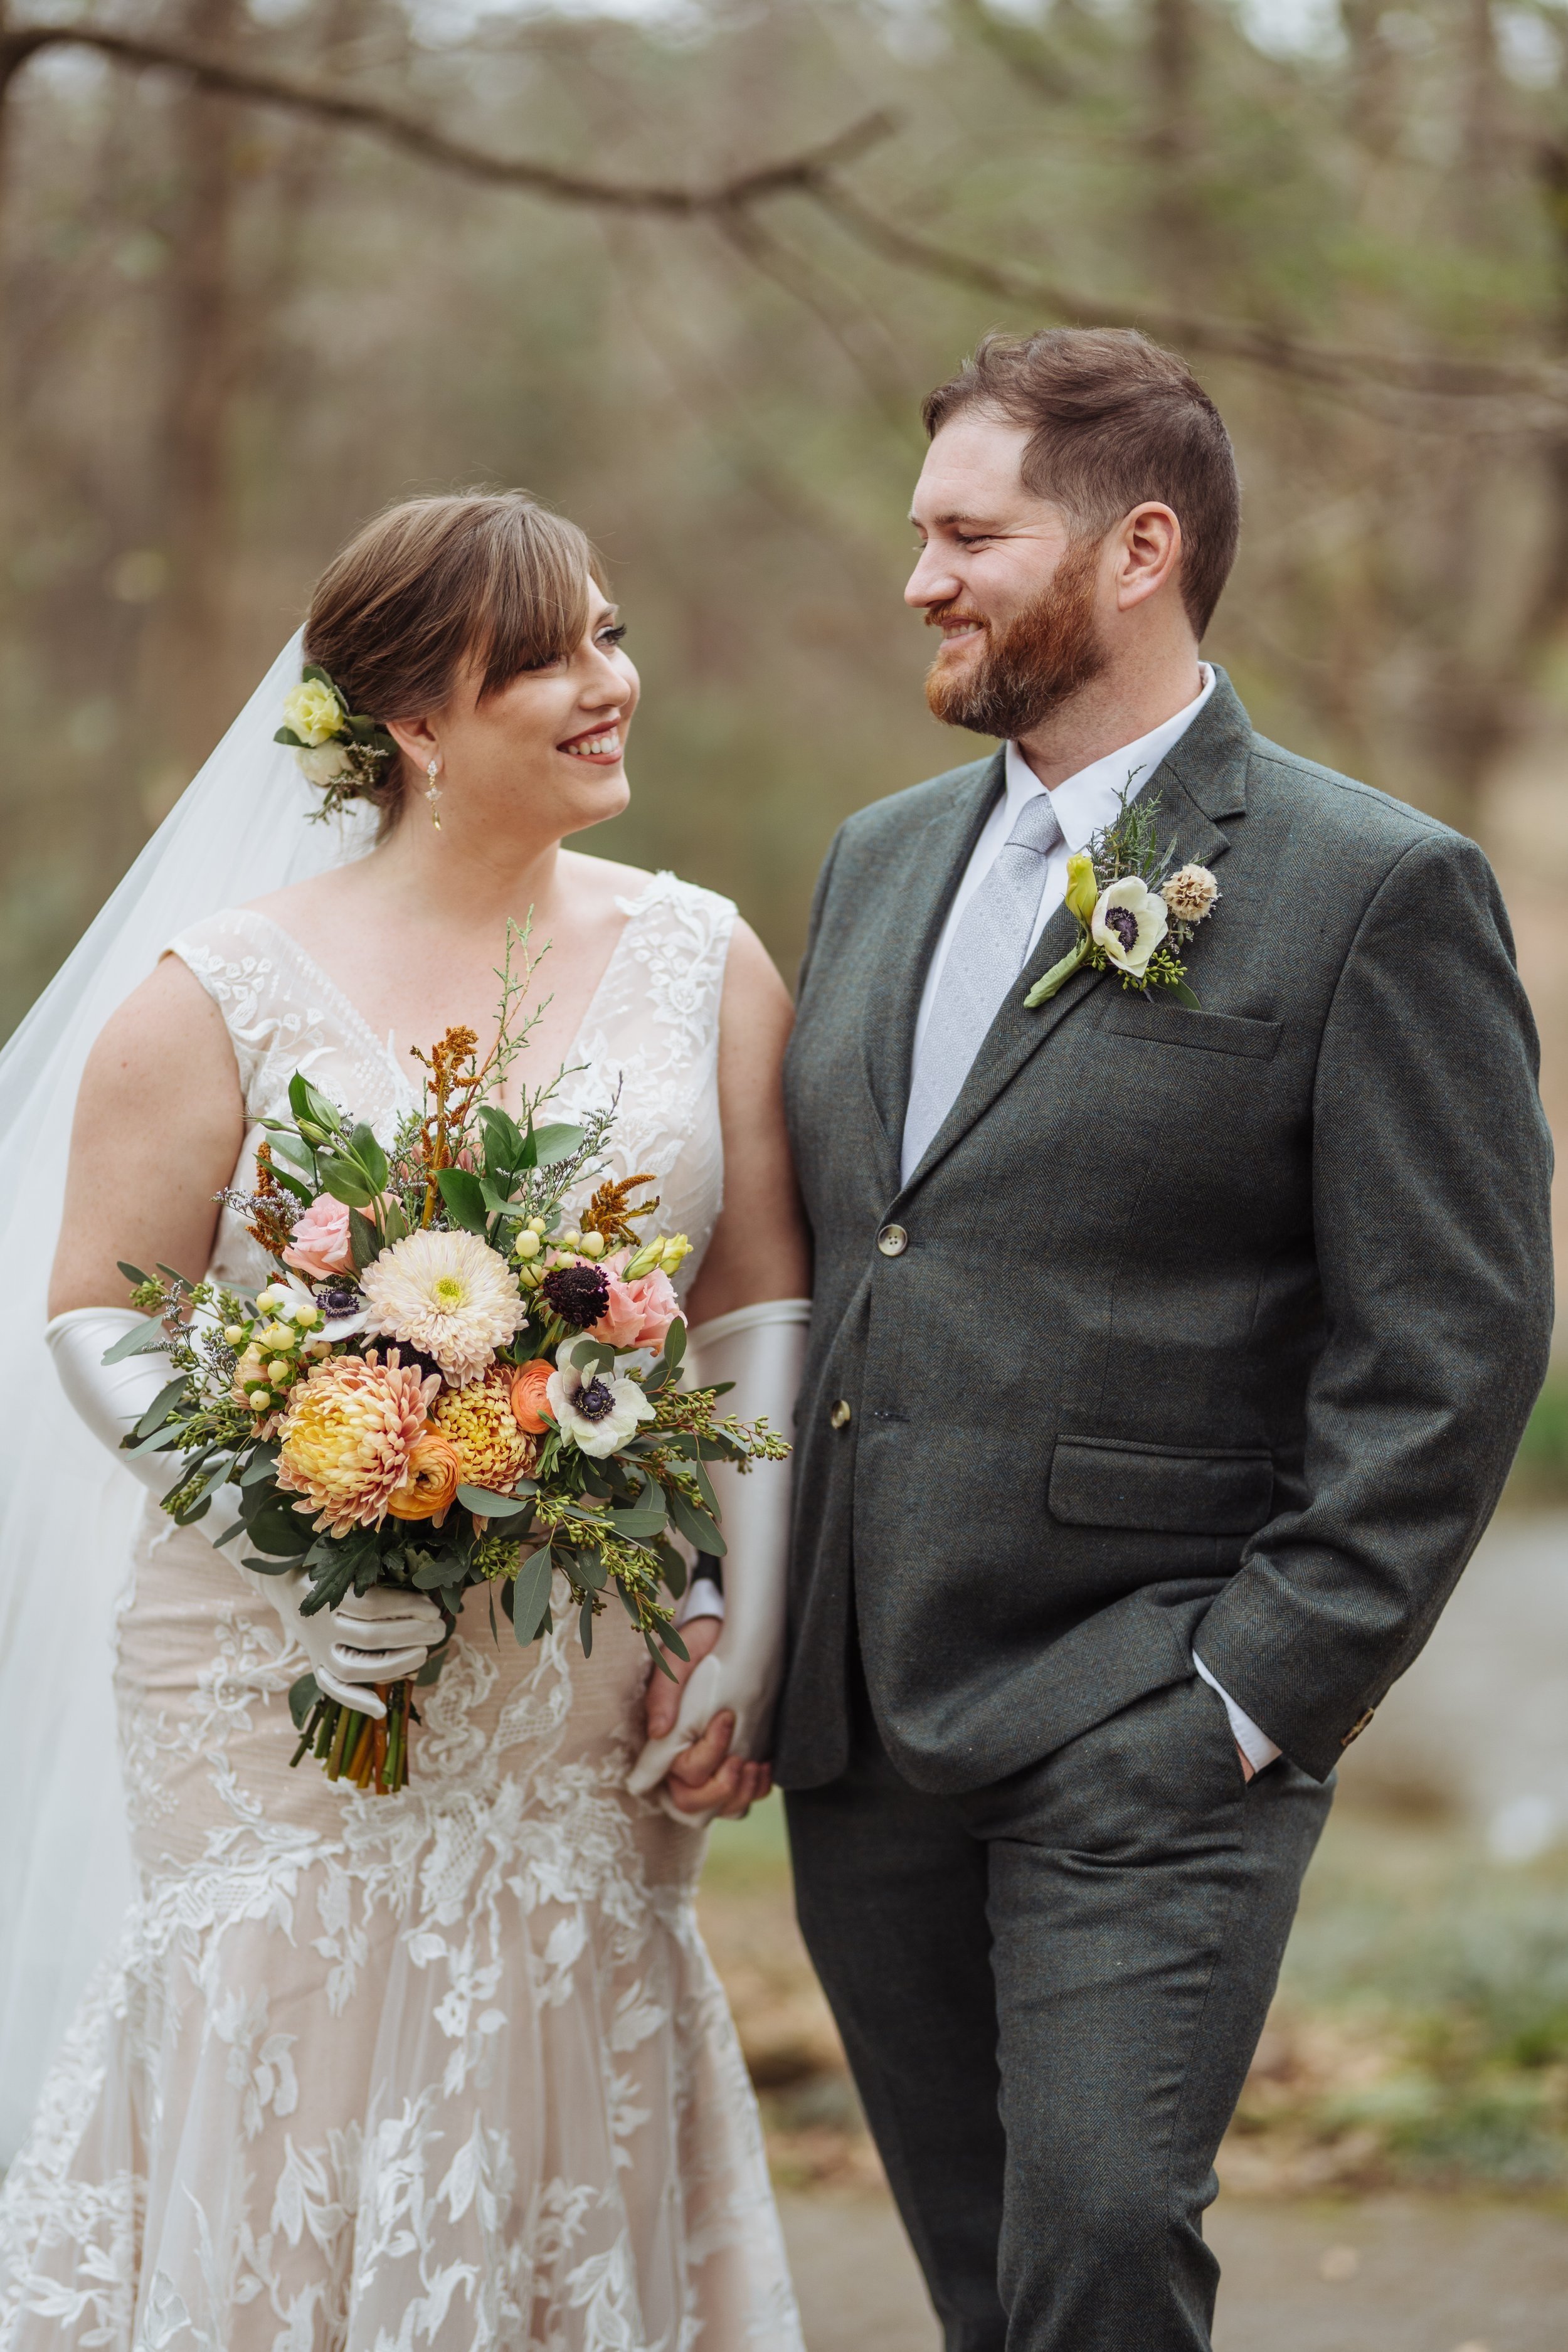 5 Things I Learned Planning a Covid Era Wedding